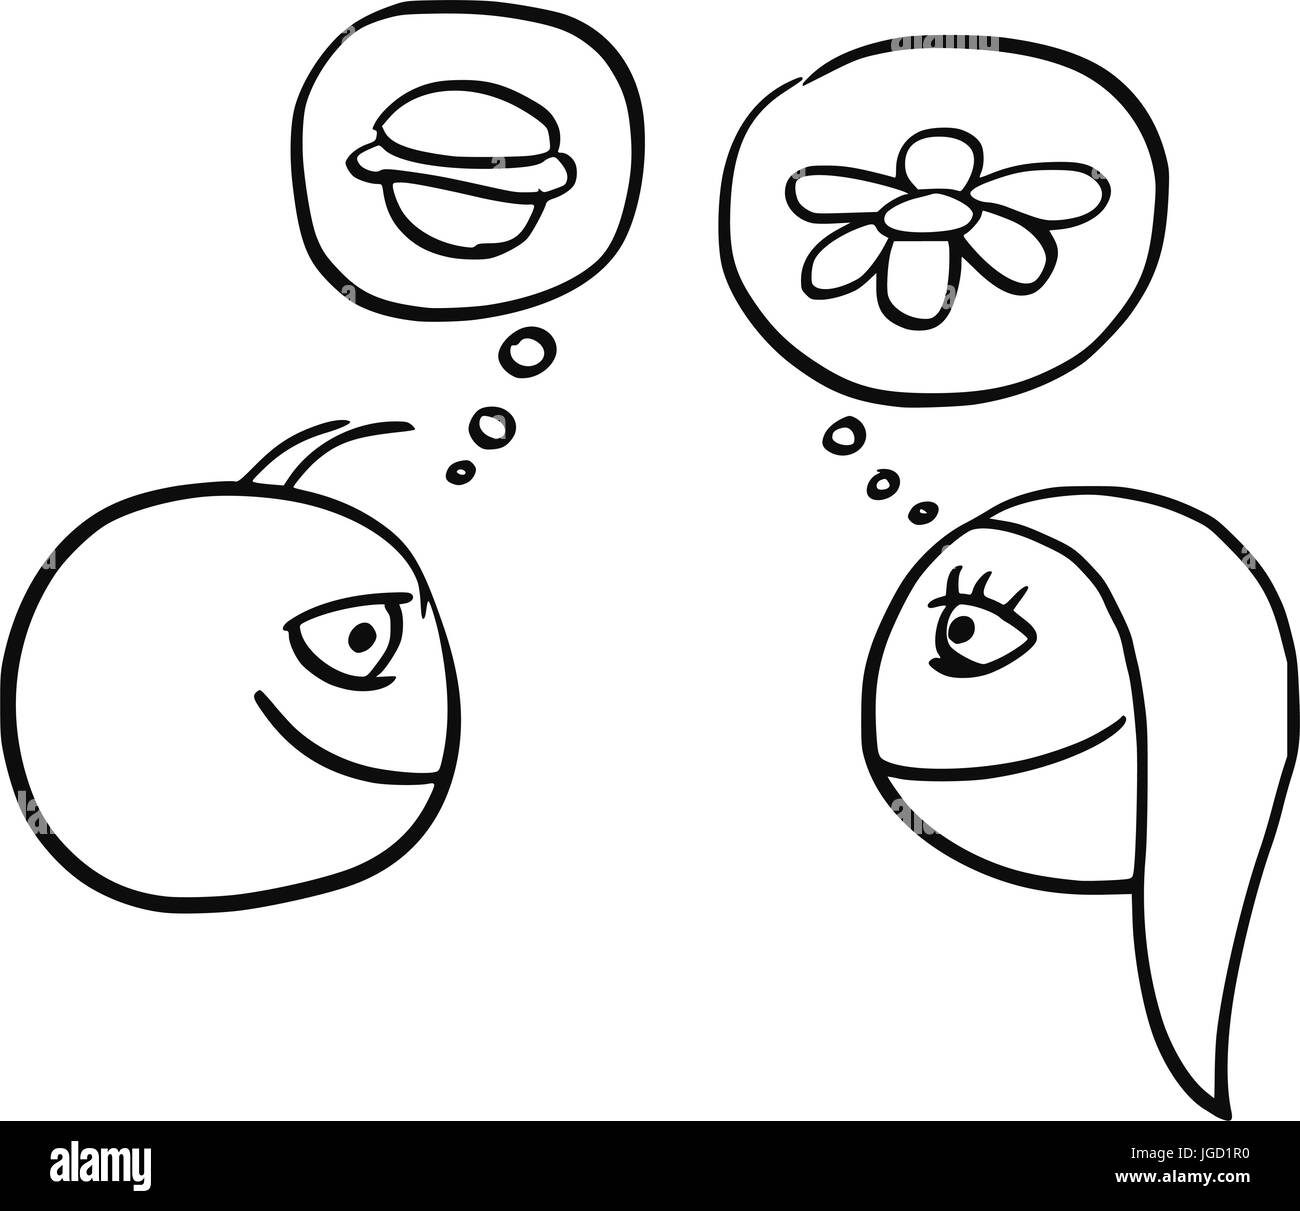 Cartoon vector of difference between man and woman thinking about hamburger burger food and daisy flower Stock Vector